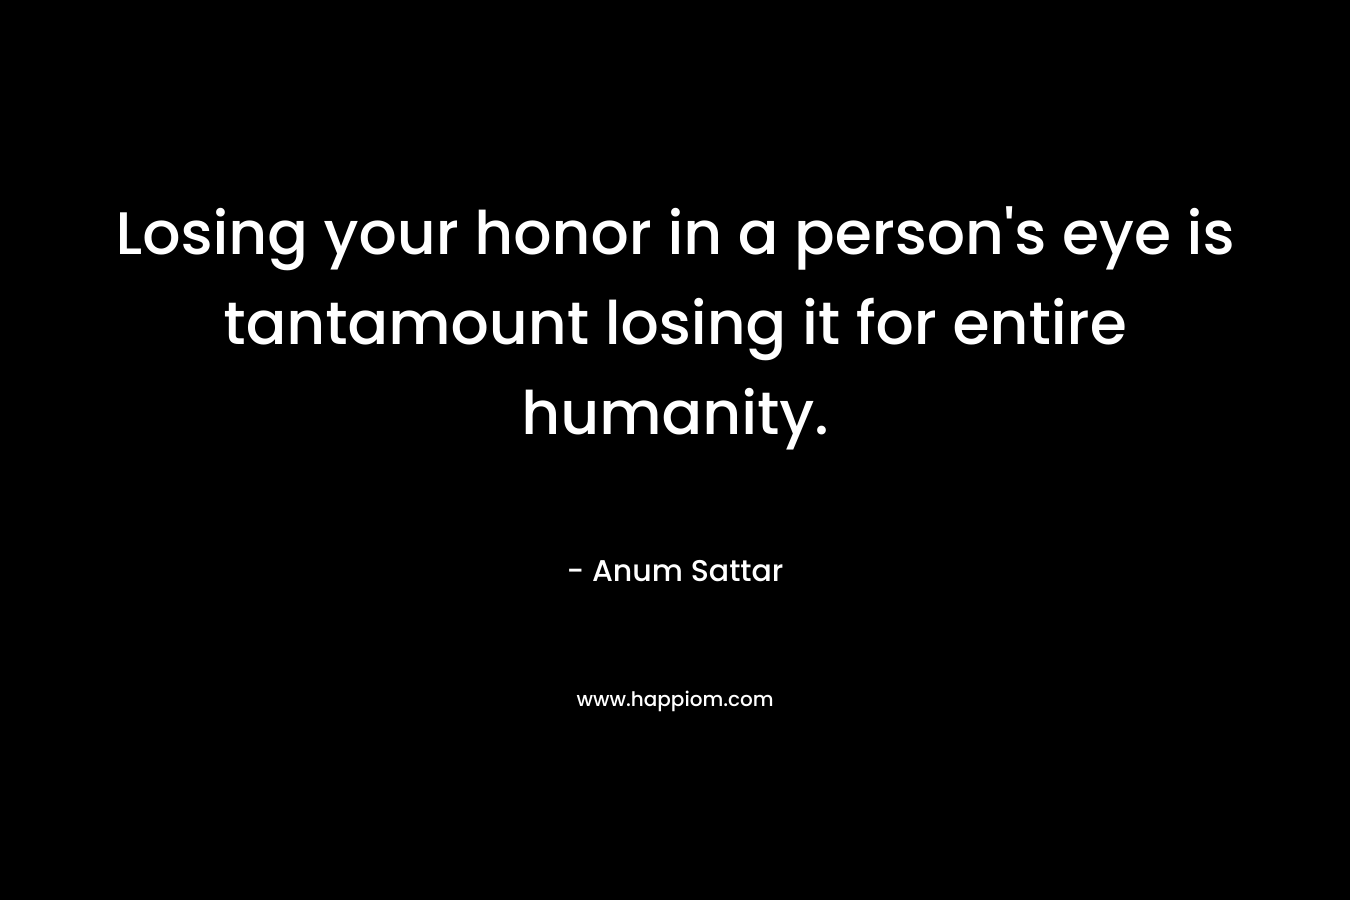 Losing your honor in a person's eye is tantamount losing it for entire humanity.